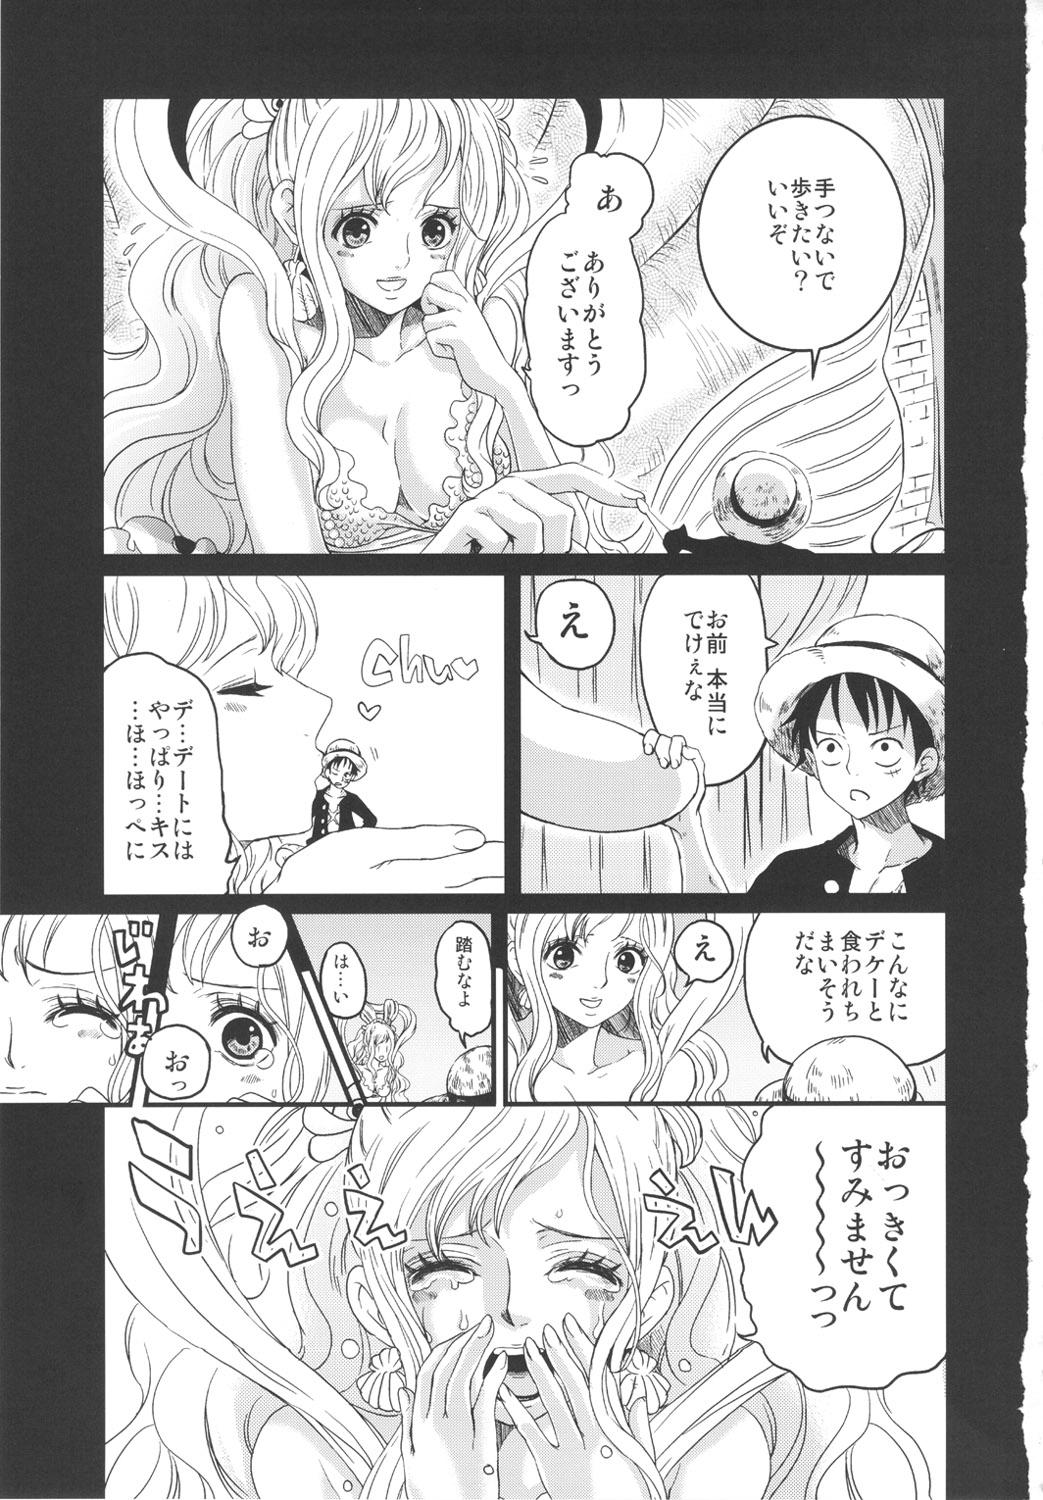 Behind Ningyohime - One piece Gay Spank - Page 3